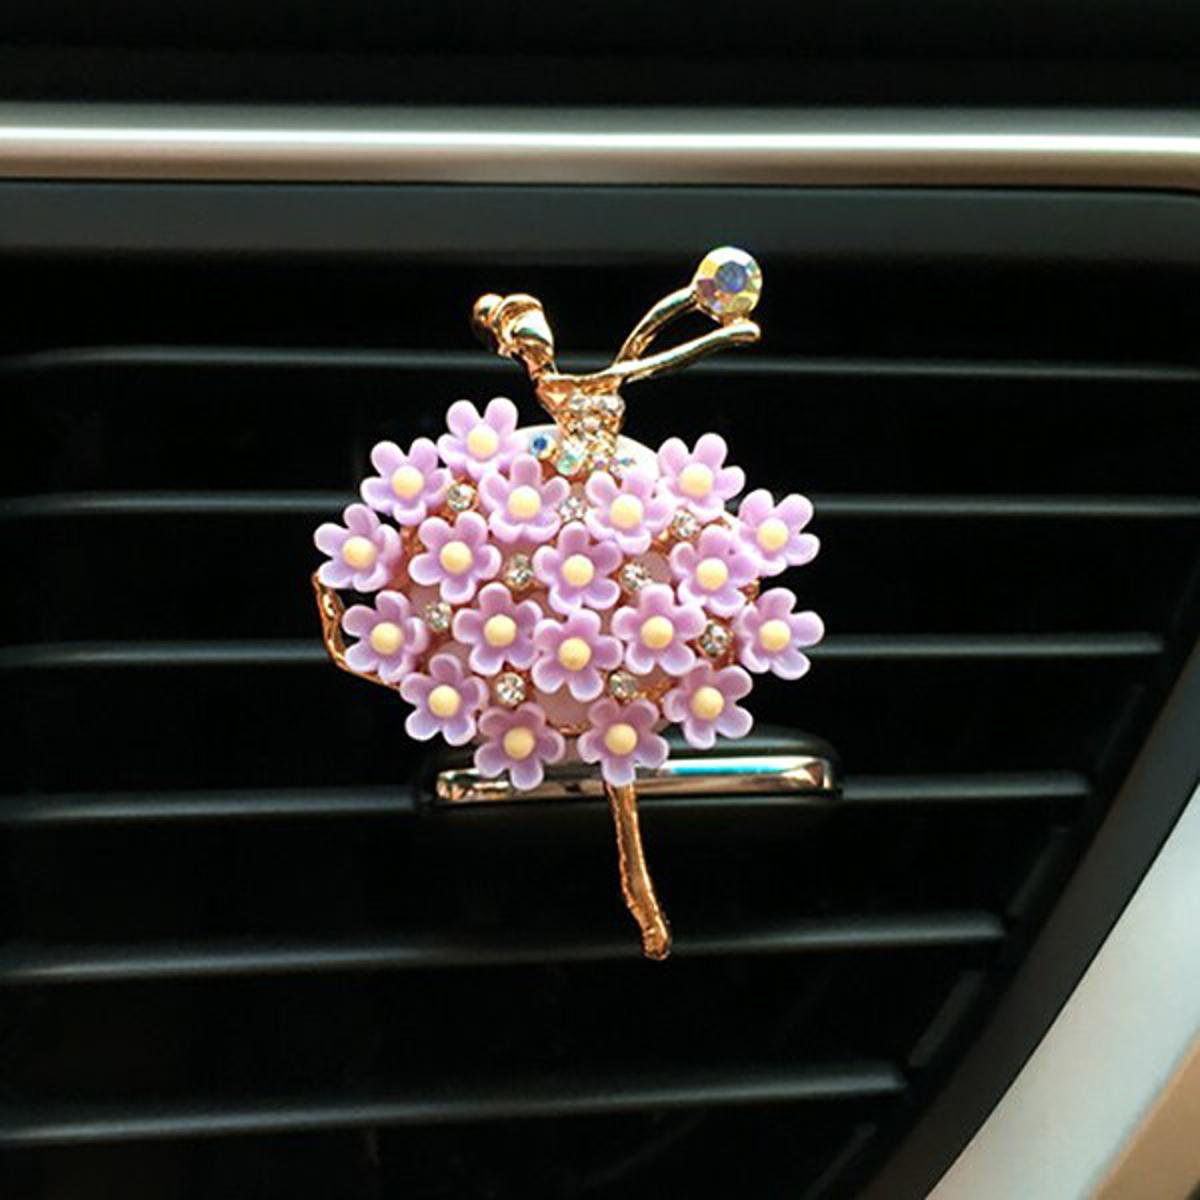 Dancing Ballet Girl Car Decoration Car Air Freshener Auto Outlet Perfume  Car Vent Clip Ornaments Car Accessories For Lady Women